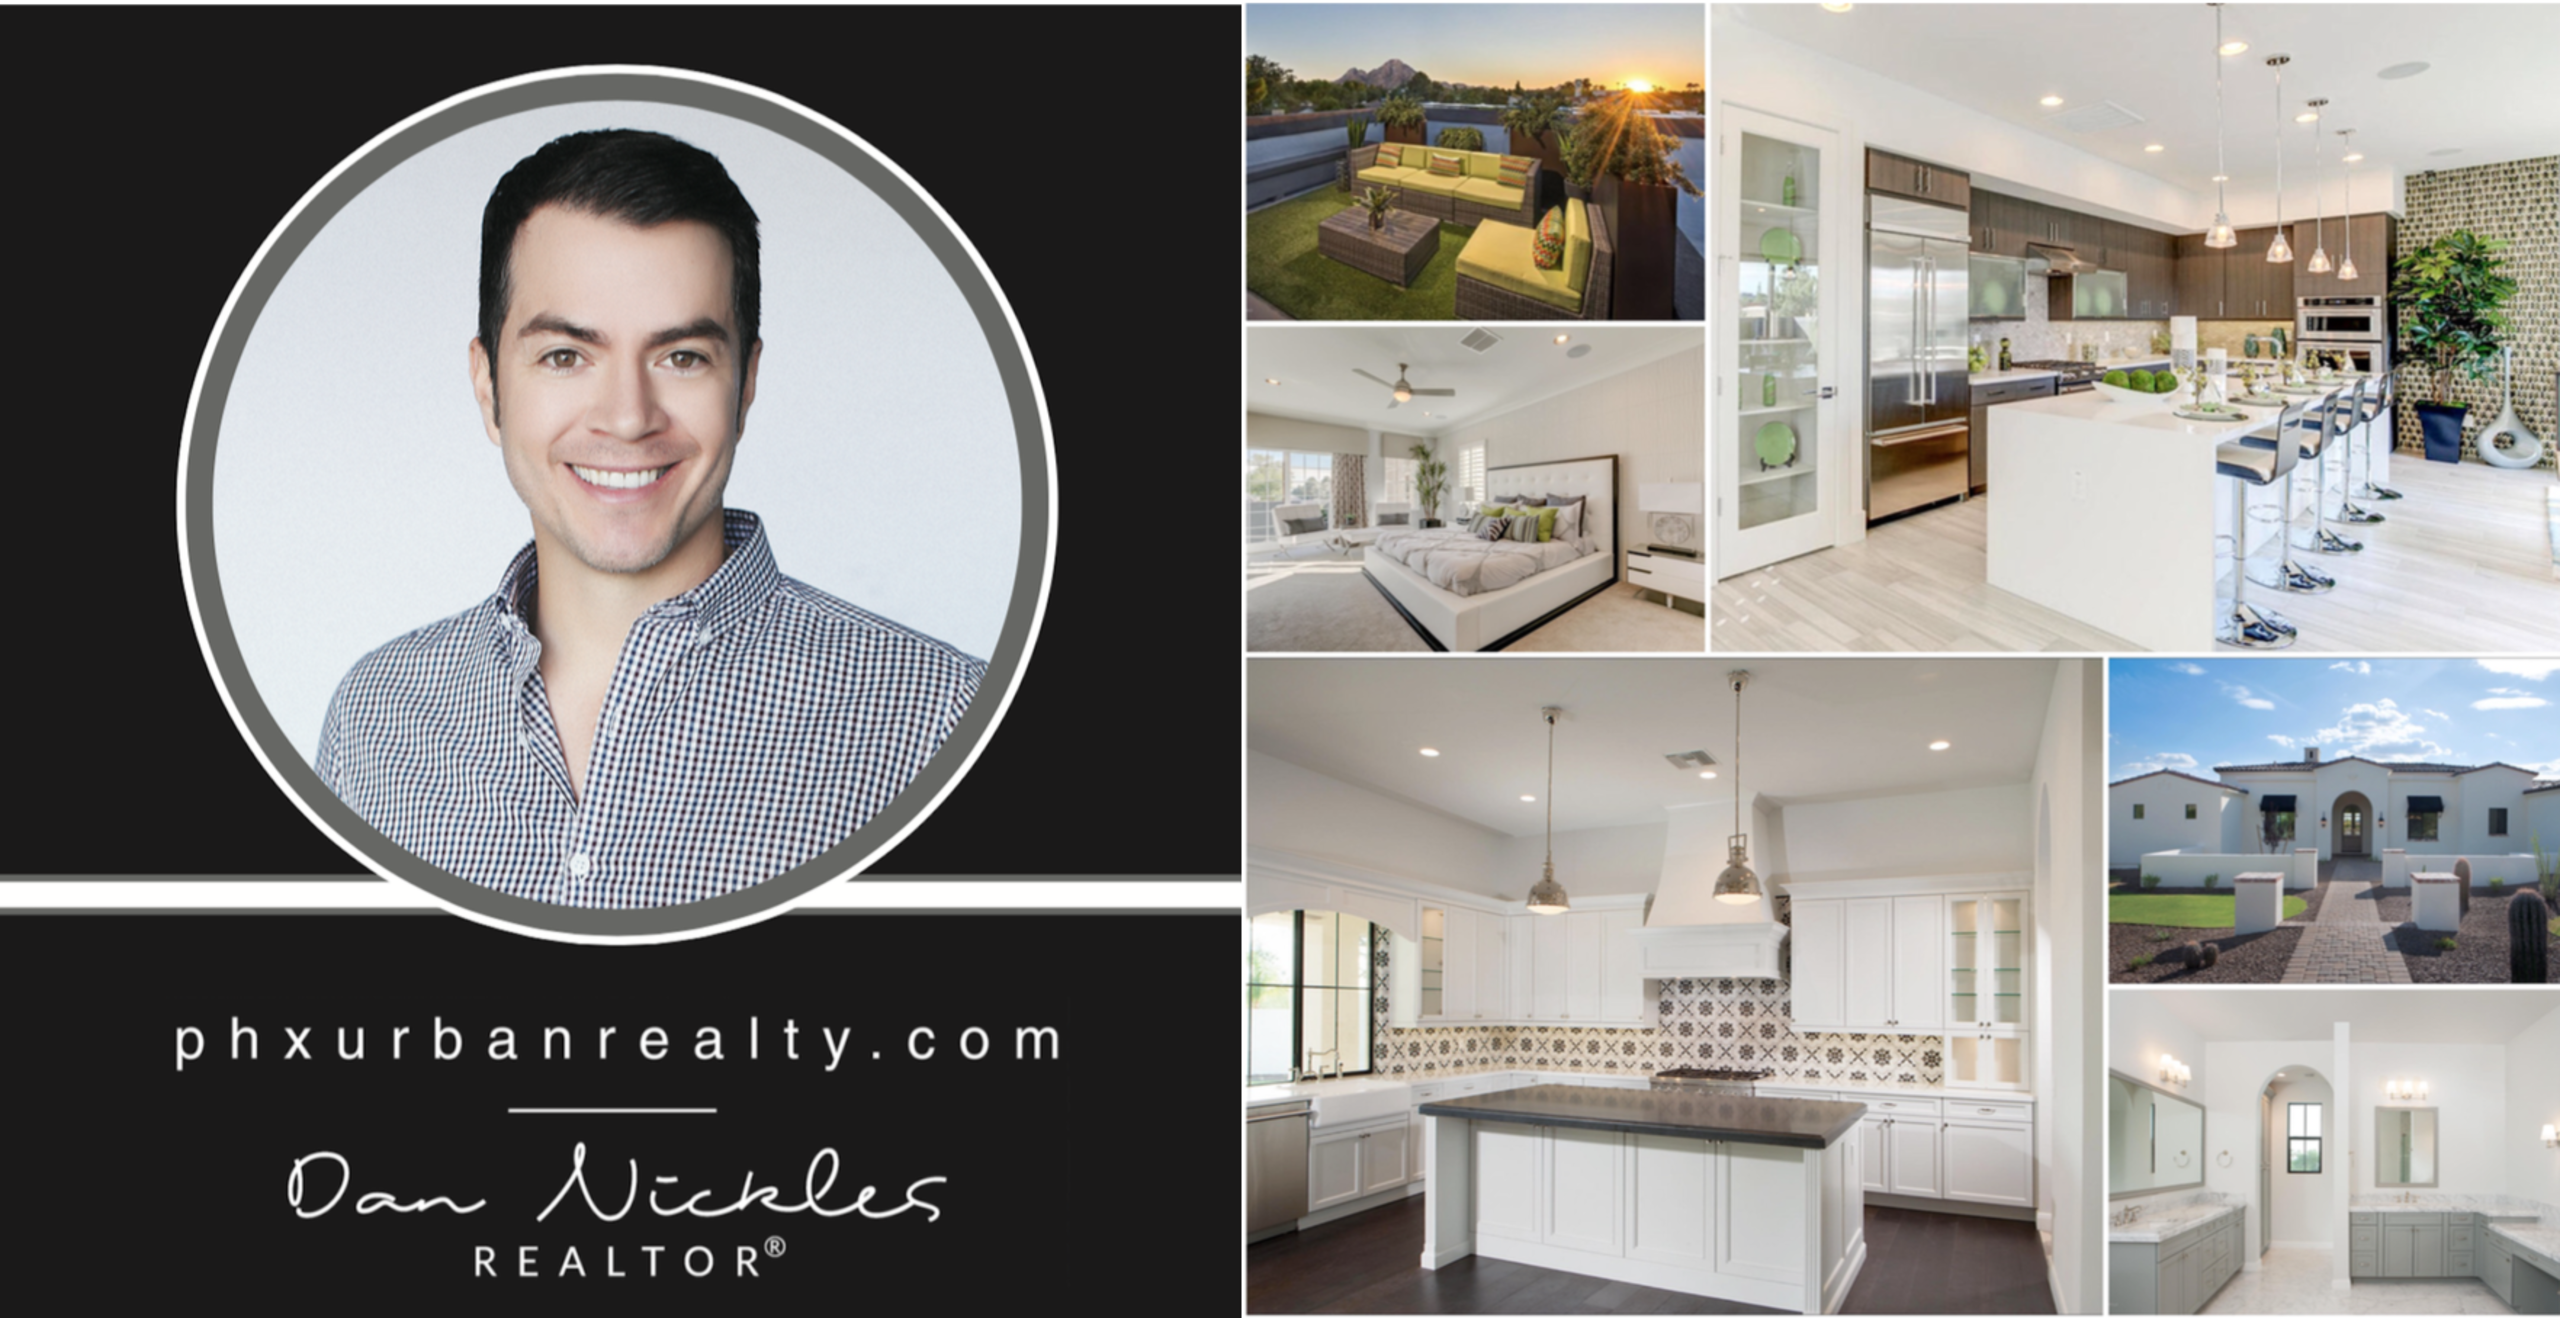 A Valley Native with 18+ years experience & over $130 Million Sold, Dan is your Local Expert!